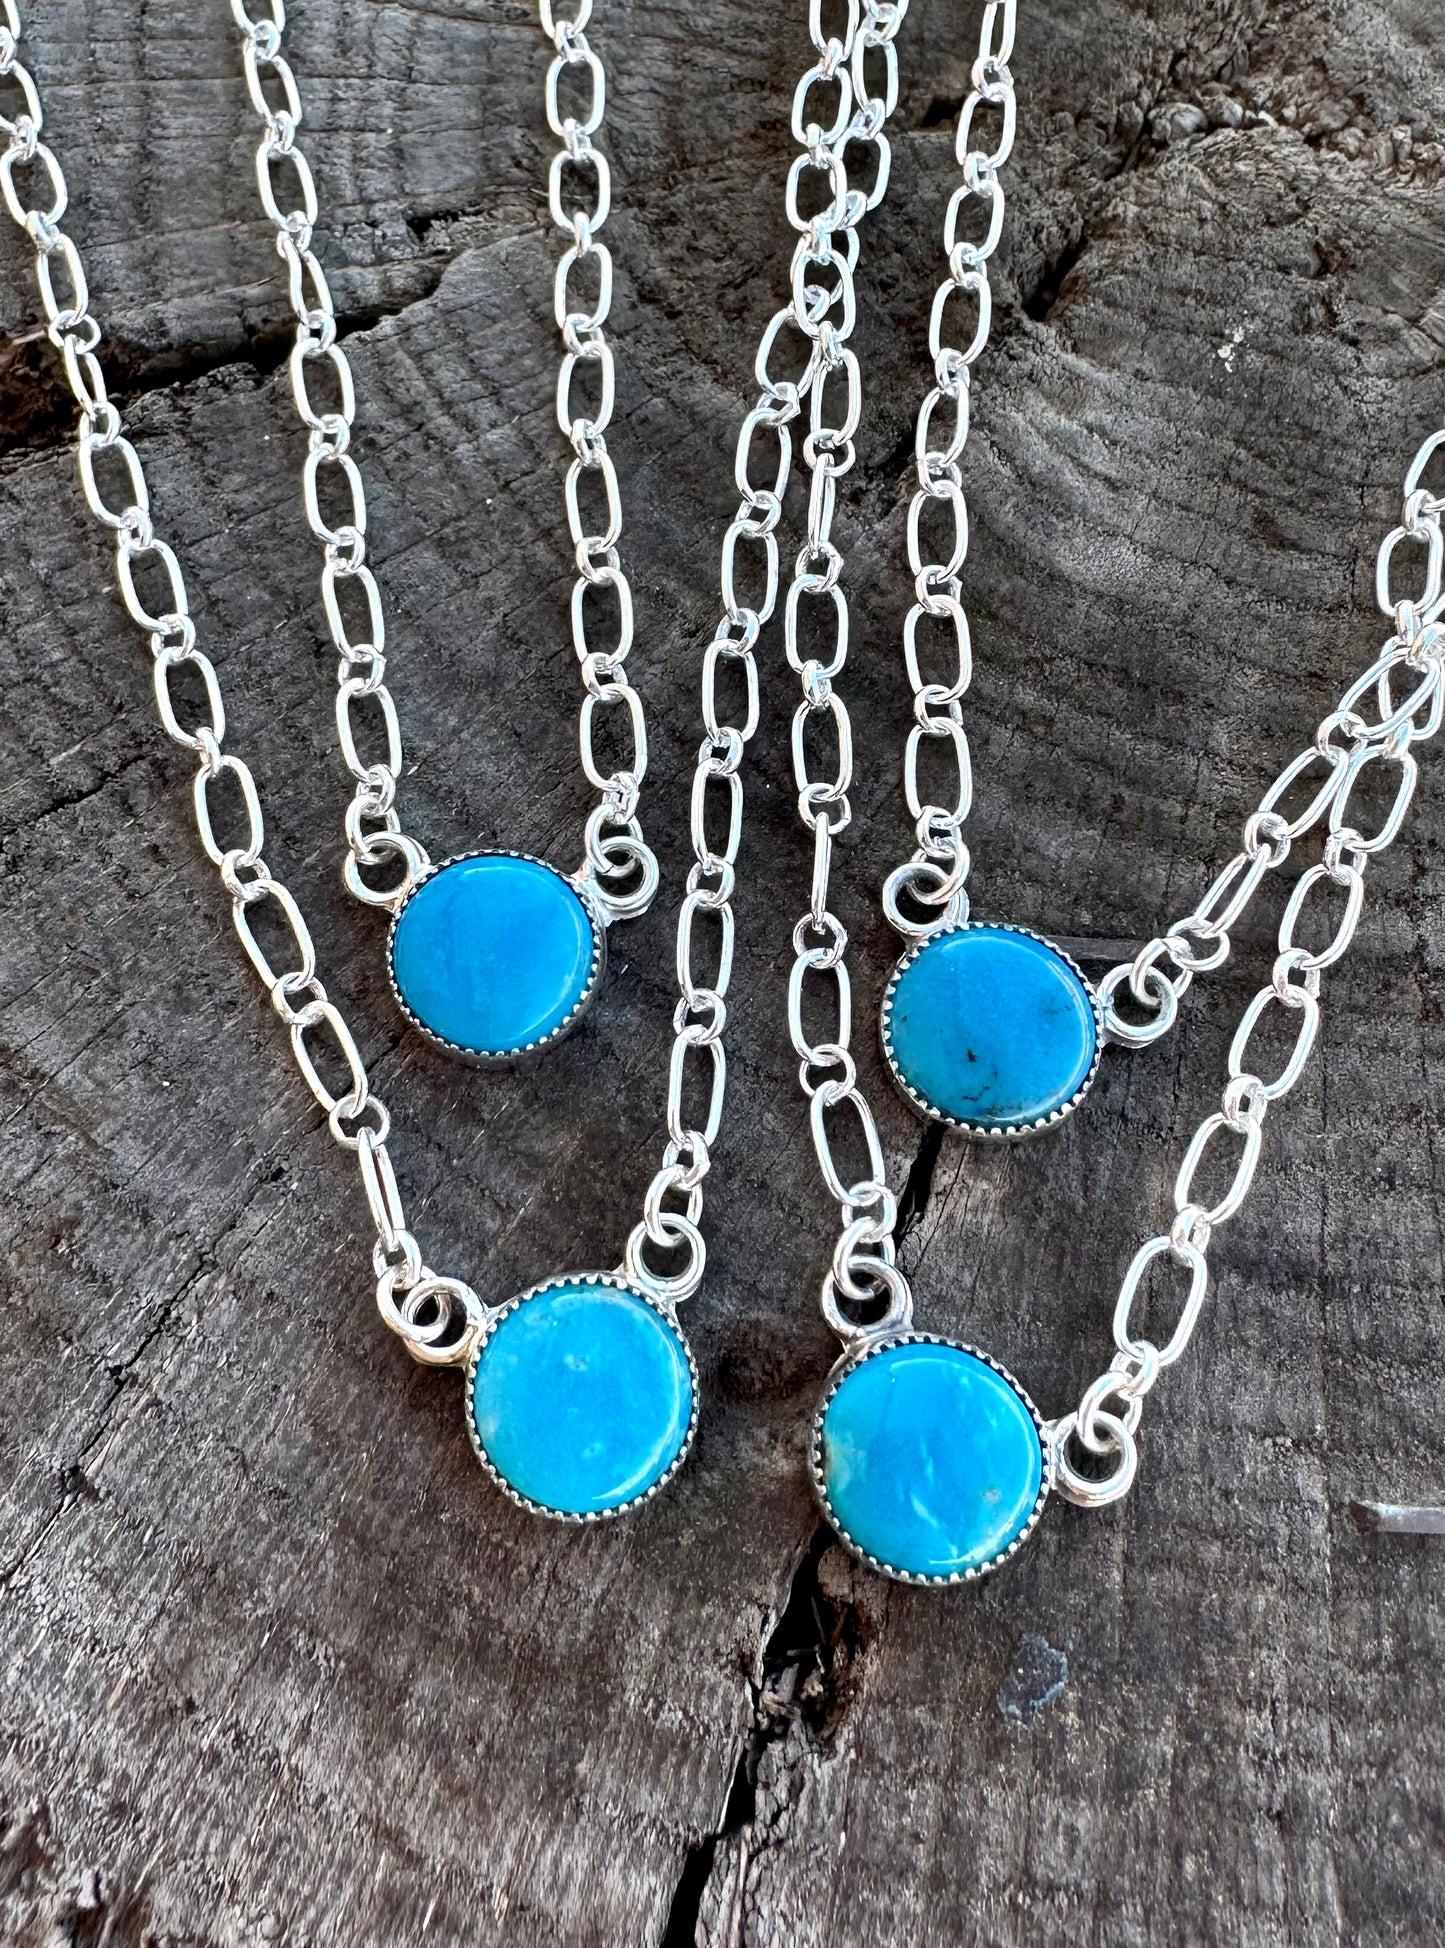 Circular Turquoise Necklace